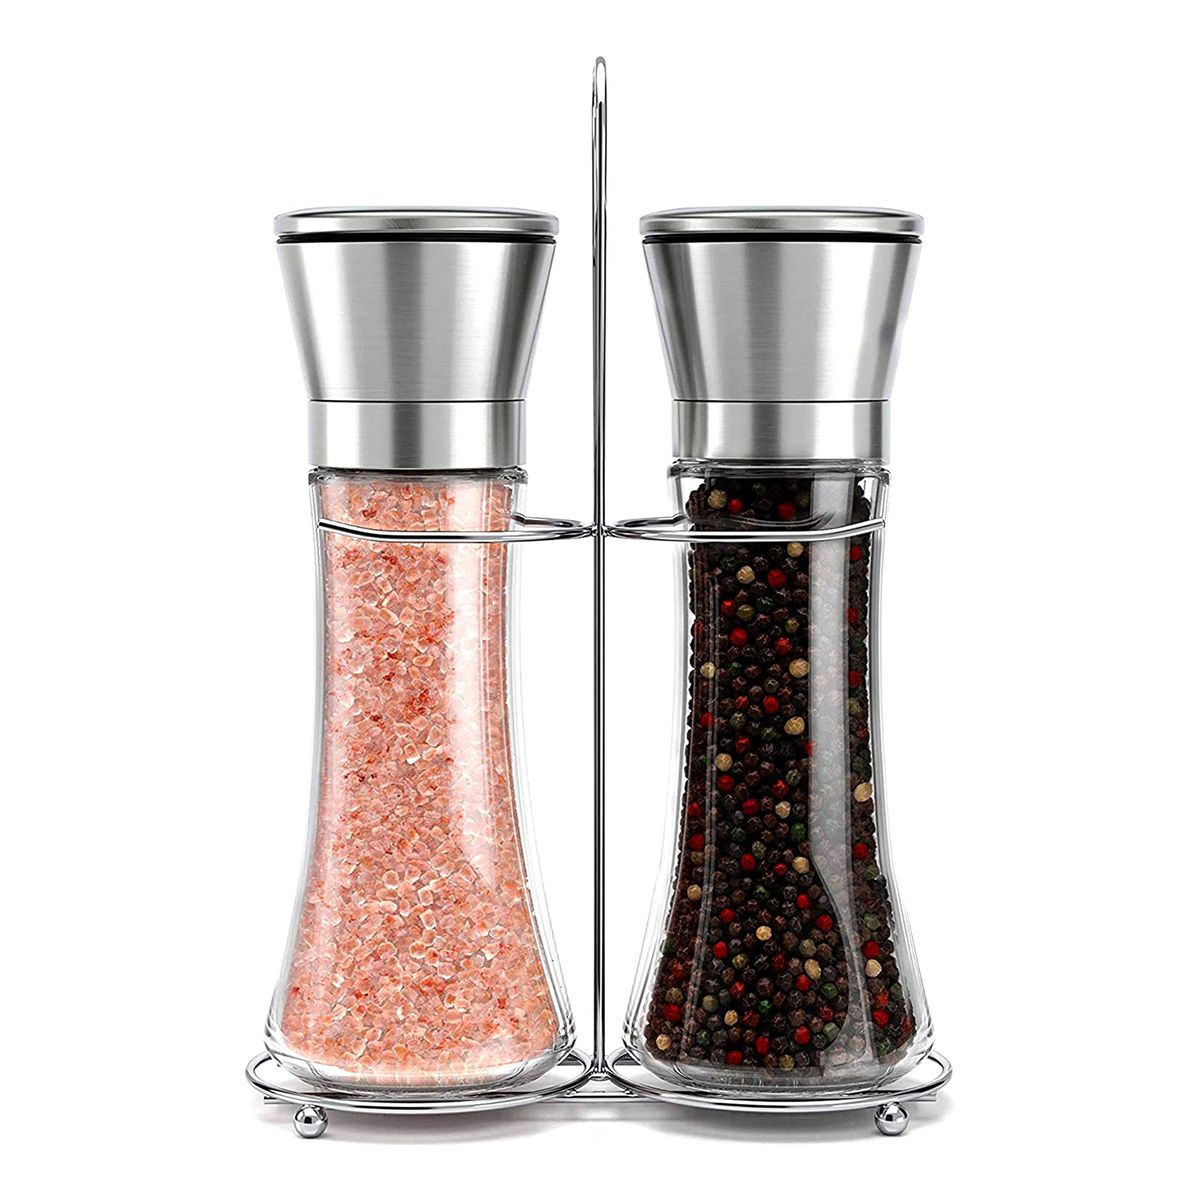 Salt and Pepper Mills with Silicone Stand Glass Body Set of Salt and Pepper Grinders with Easy Adjustable Ceramic Coarseness Pepper Grinder 2 pcs Brozen Painting Stainless Steel 